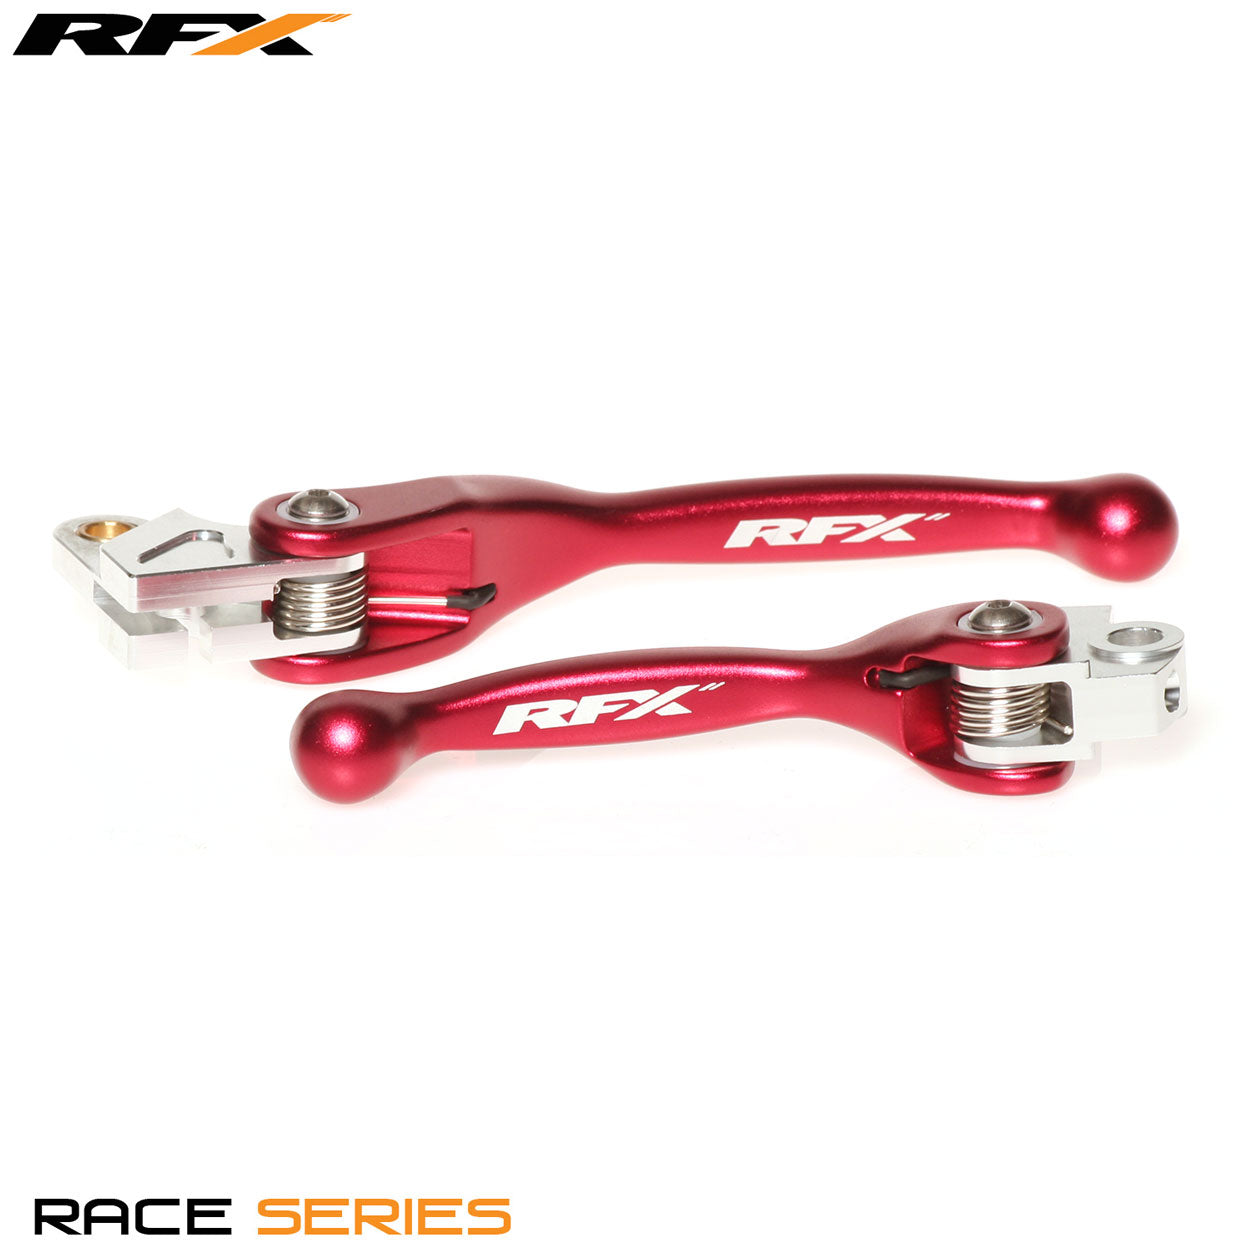 RFX Race Forged Flexible Lever Set (Red) Honda CRF150 07-22 CR80/85 98-07 CR125/250 92-03